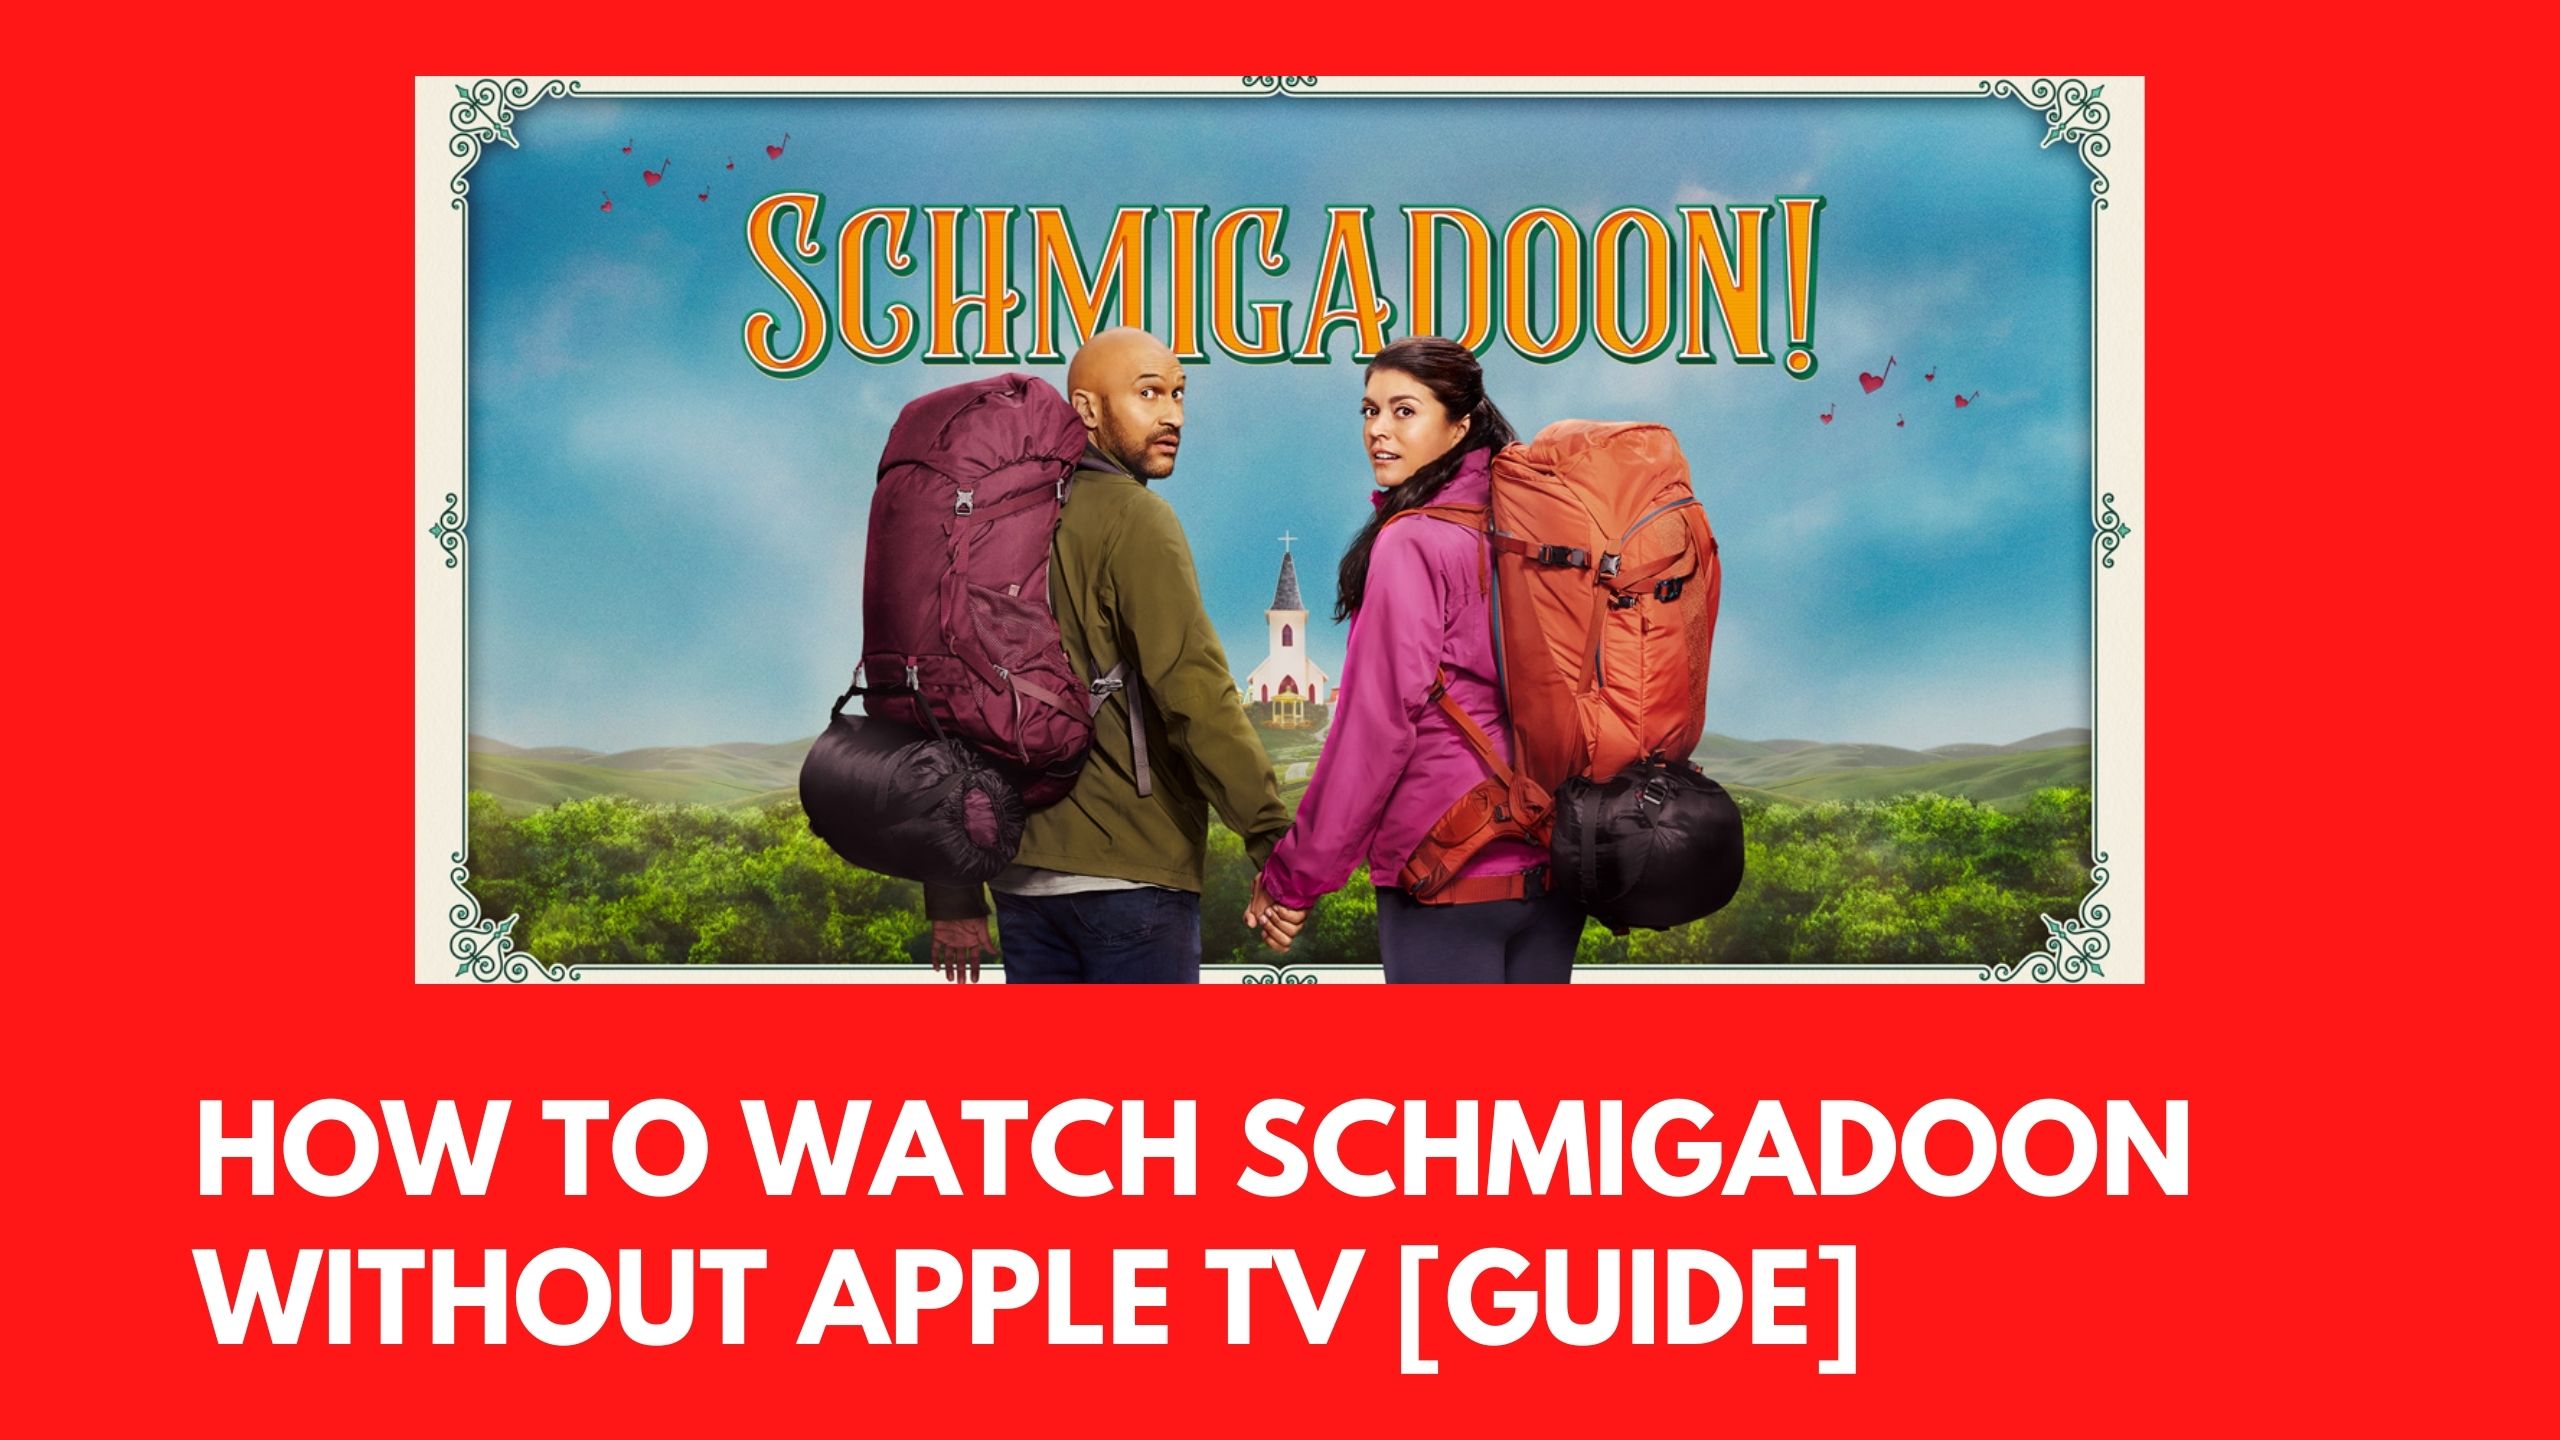 How to Watch Schmigadoon Without Apple TV [Guide]